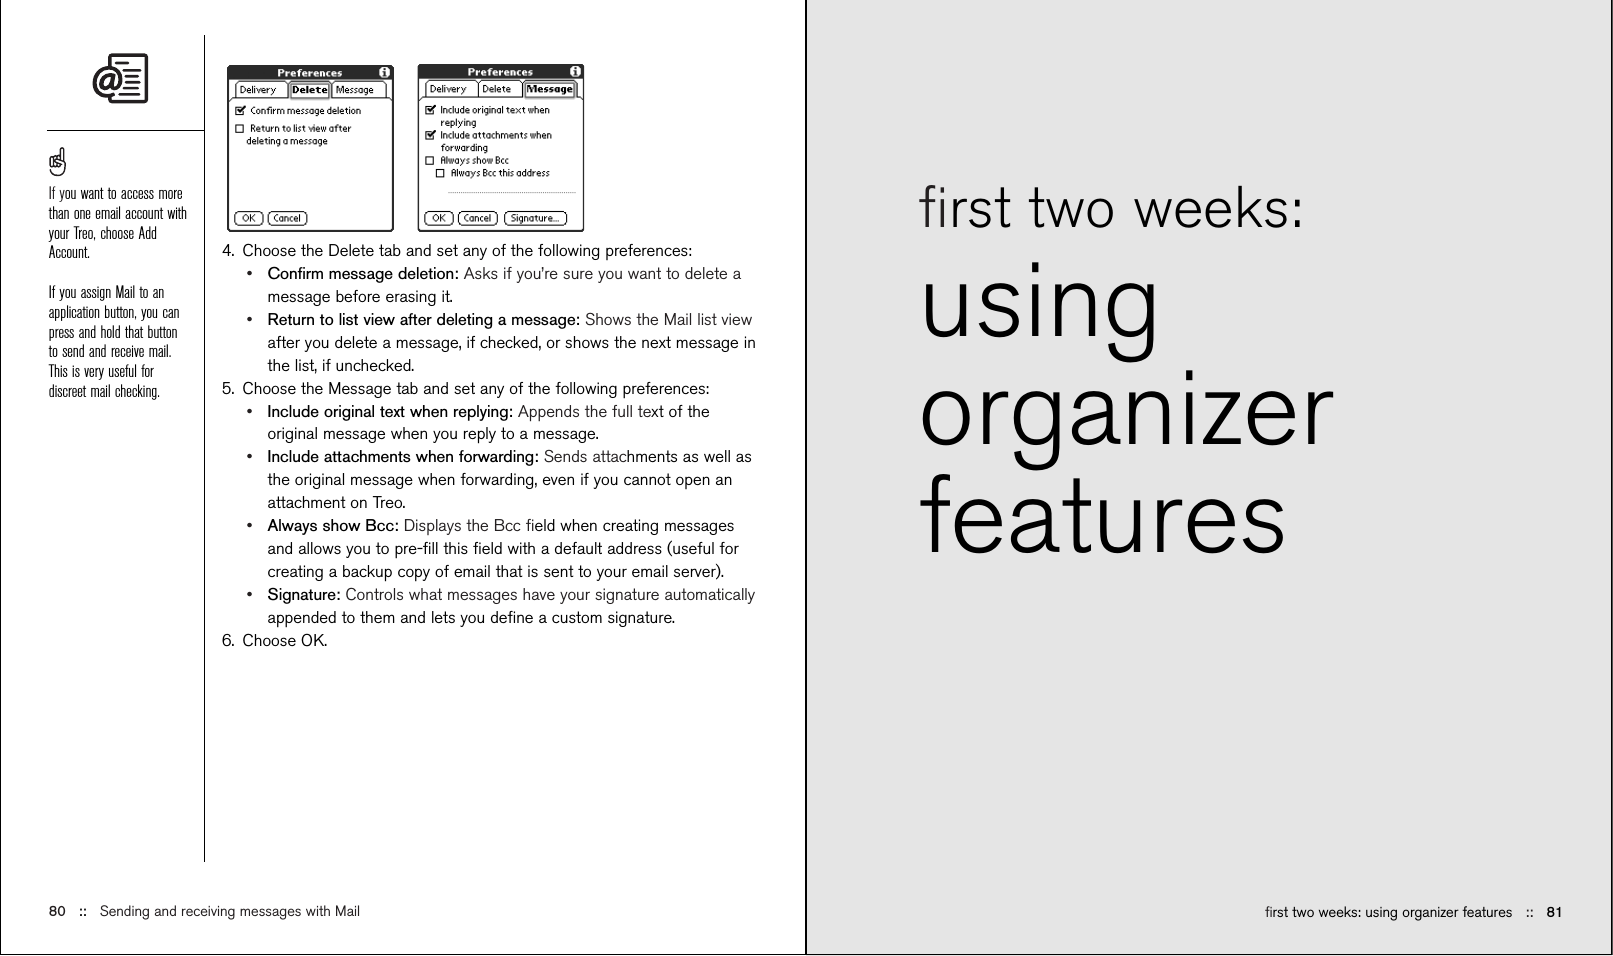 ﬁrst two weeks: using organizer features ::   81ﬁrst two weeks: usingorganizerfeatures4. Choose the Delete tab and set any of the following preferences:•Conﬁrm message deletion: Asks if you’re sure you want to delete amessage before erasing it.•Return to list view after deleting a message: Shows the Mail list viewafter you delete a message, if checked, or shows the next message inthe list, if unchecked.5. Choose the Message tab and set any of the following preferences:•Include original text when replying: Appends the full text of theoriginal message when you reply to a message.•Include attachments when forwarding: Sends attachments as well asthe original message when forwarding, even if you cannot open anattachment on Treo.•Always show Bcc: Displays the Bcc ﬁeld when creating messagesand allows you to pre-ﬁll this ﬁeld with a default address (useful forcreating a backup copy of email that is sent to your email server).•Signature: Controls what messages have your signature automaticallyappended to them and lets you deﬁne a custom signature.6. Choose OK.80 ::   Sending and receiving messages with MailIf you want to access morethan one email account withyour Treo, choose AddAccount.If you assign Mail to anapplication button, you canpress and hold that buttonto send and receive mail.This is very useful fordiscreet mail checking.